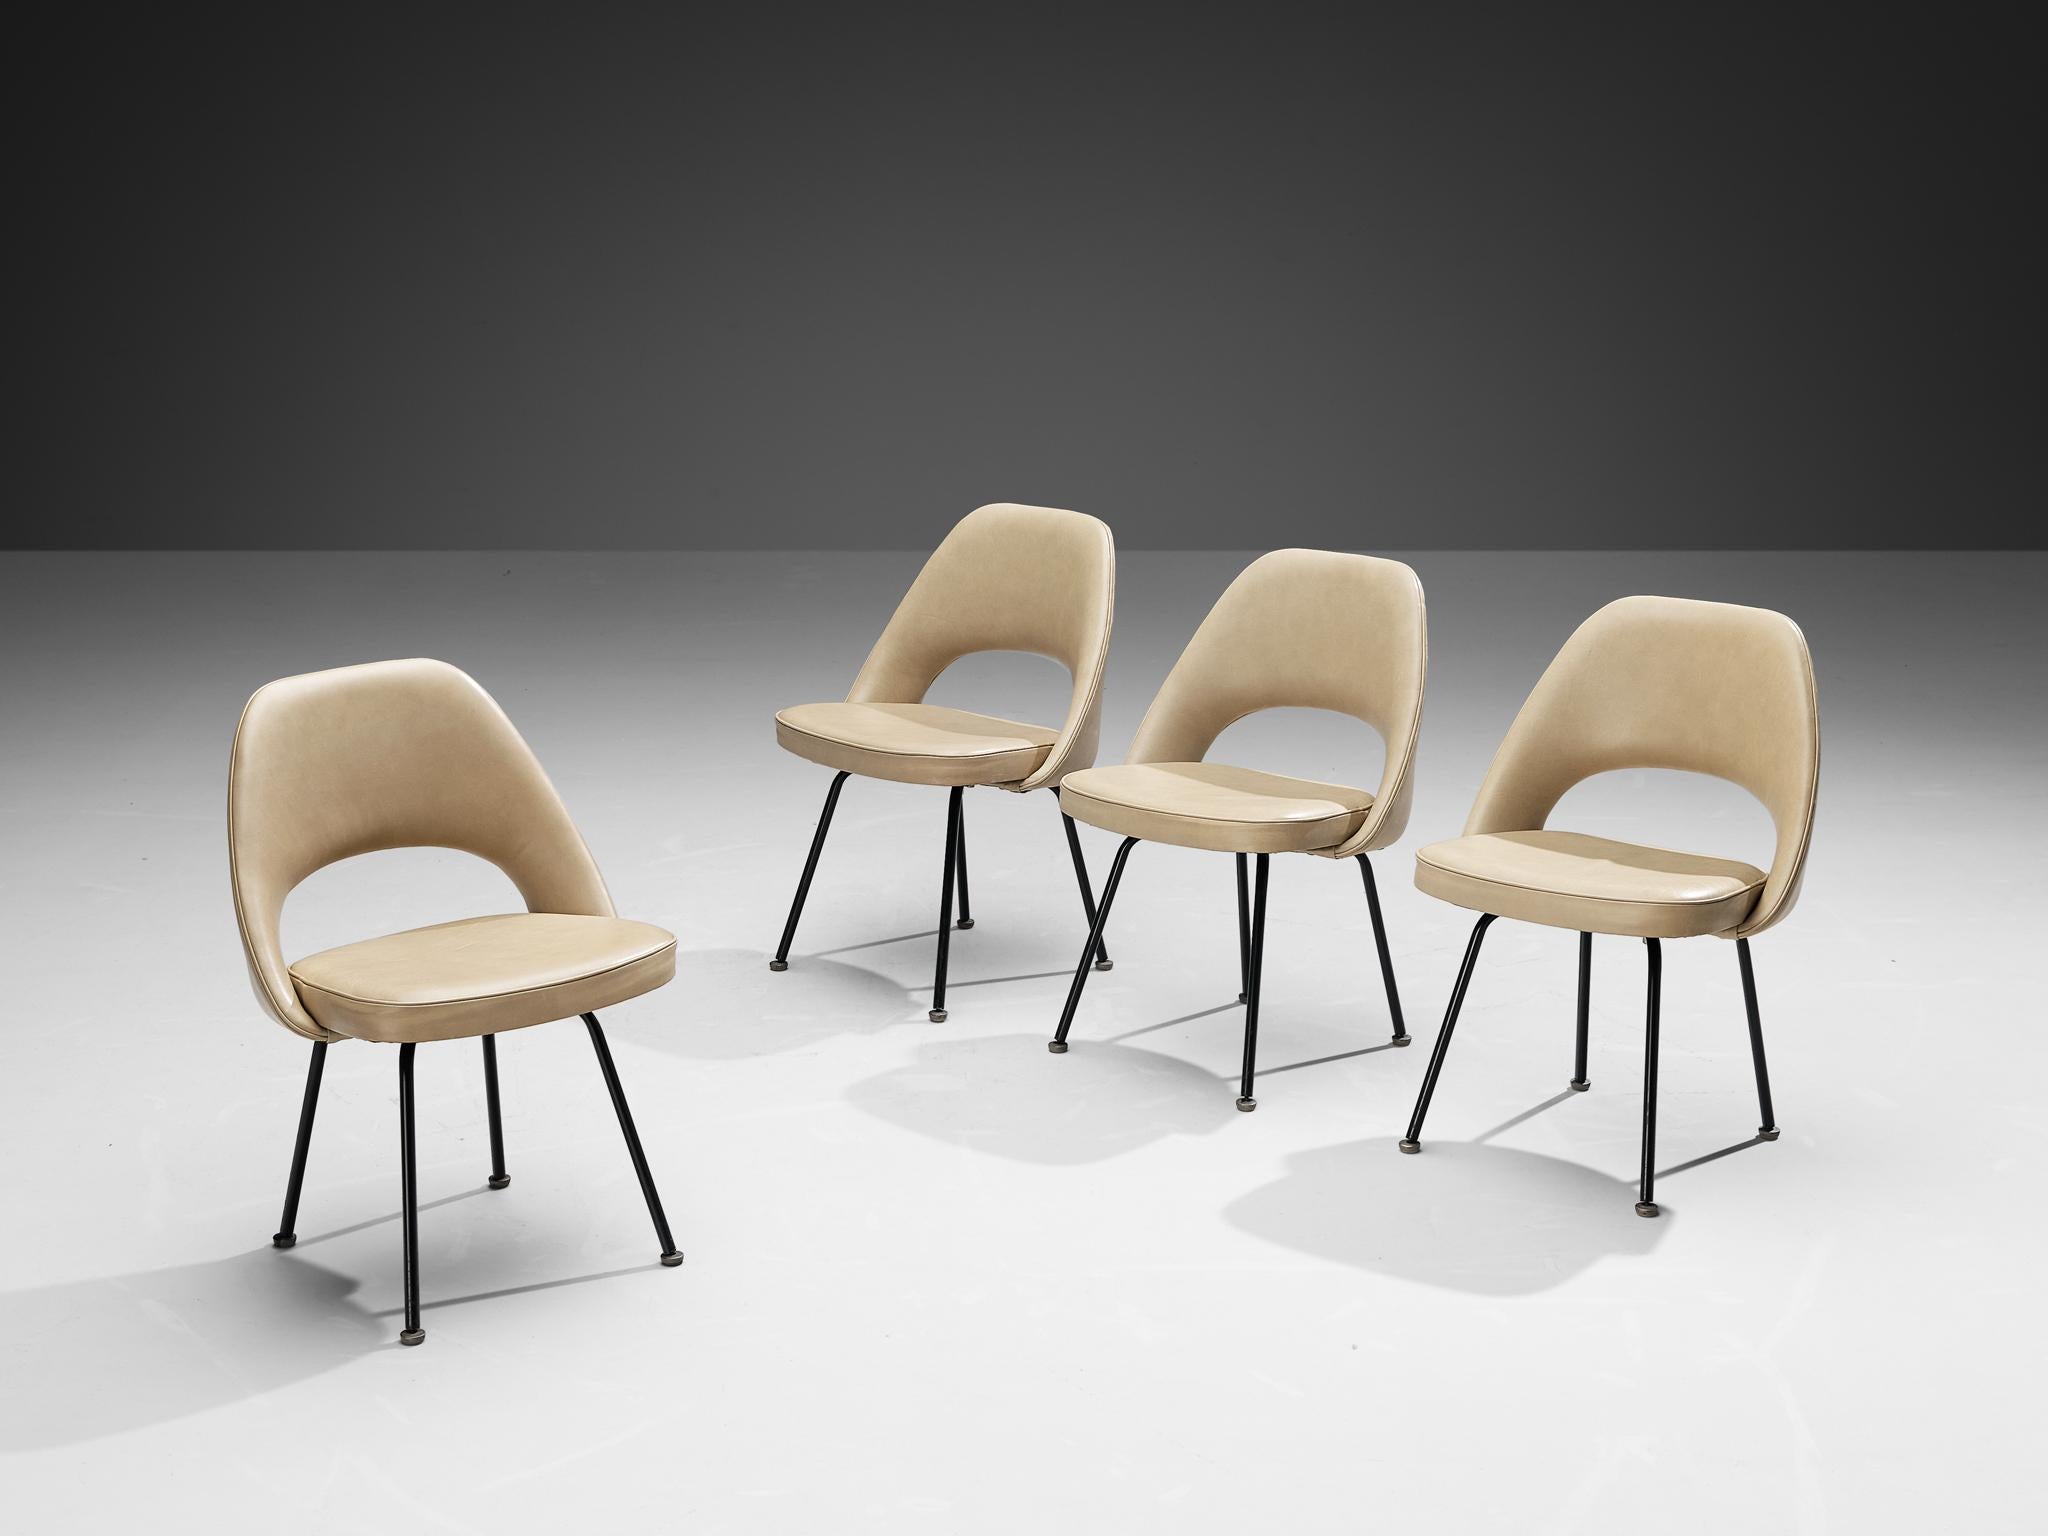 Eero Saarinen for Knoll, set of four dining chairs, model '72', lacquered steel, leather, United States, design 1948, later production

Set of four organic shaped chairs designed by Eero Saarinen. A fluid, sculptural form. This timeless and